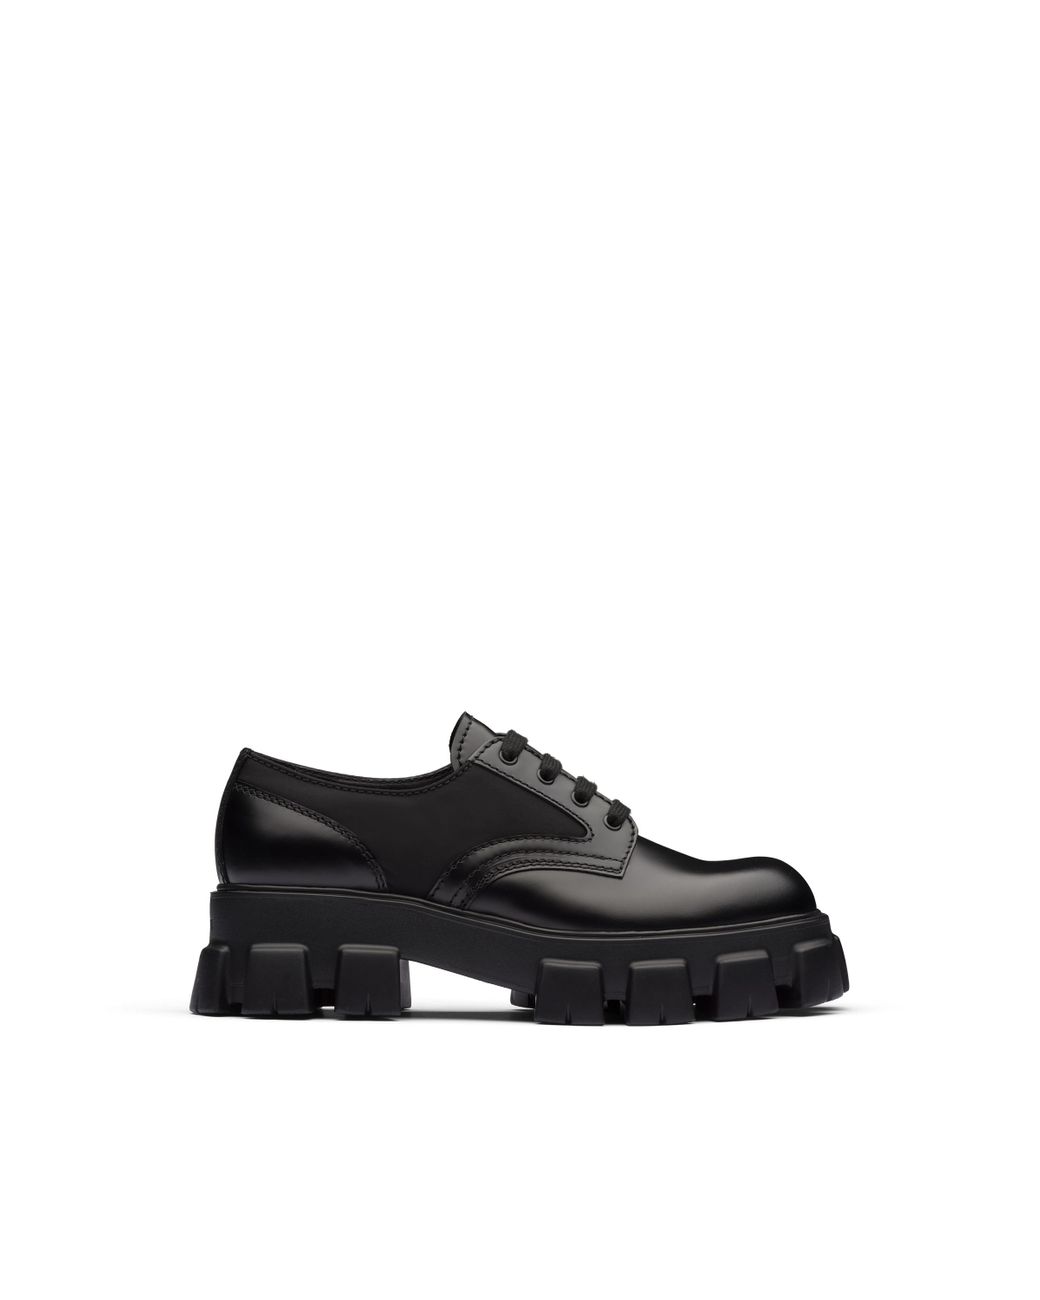 Prada Monolith Brushed Leather And Nylon Lace-up Shoes in Black for Men -  Lyst